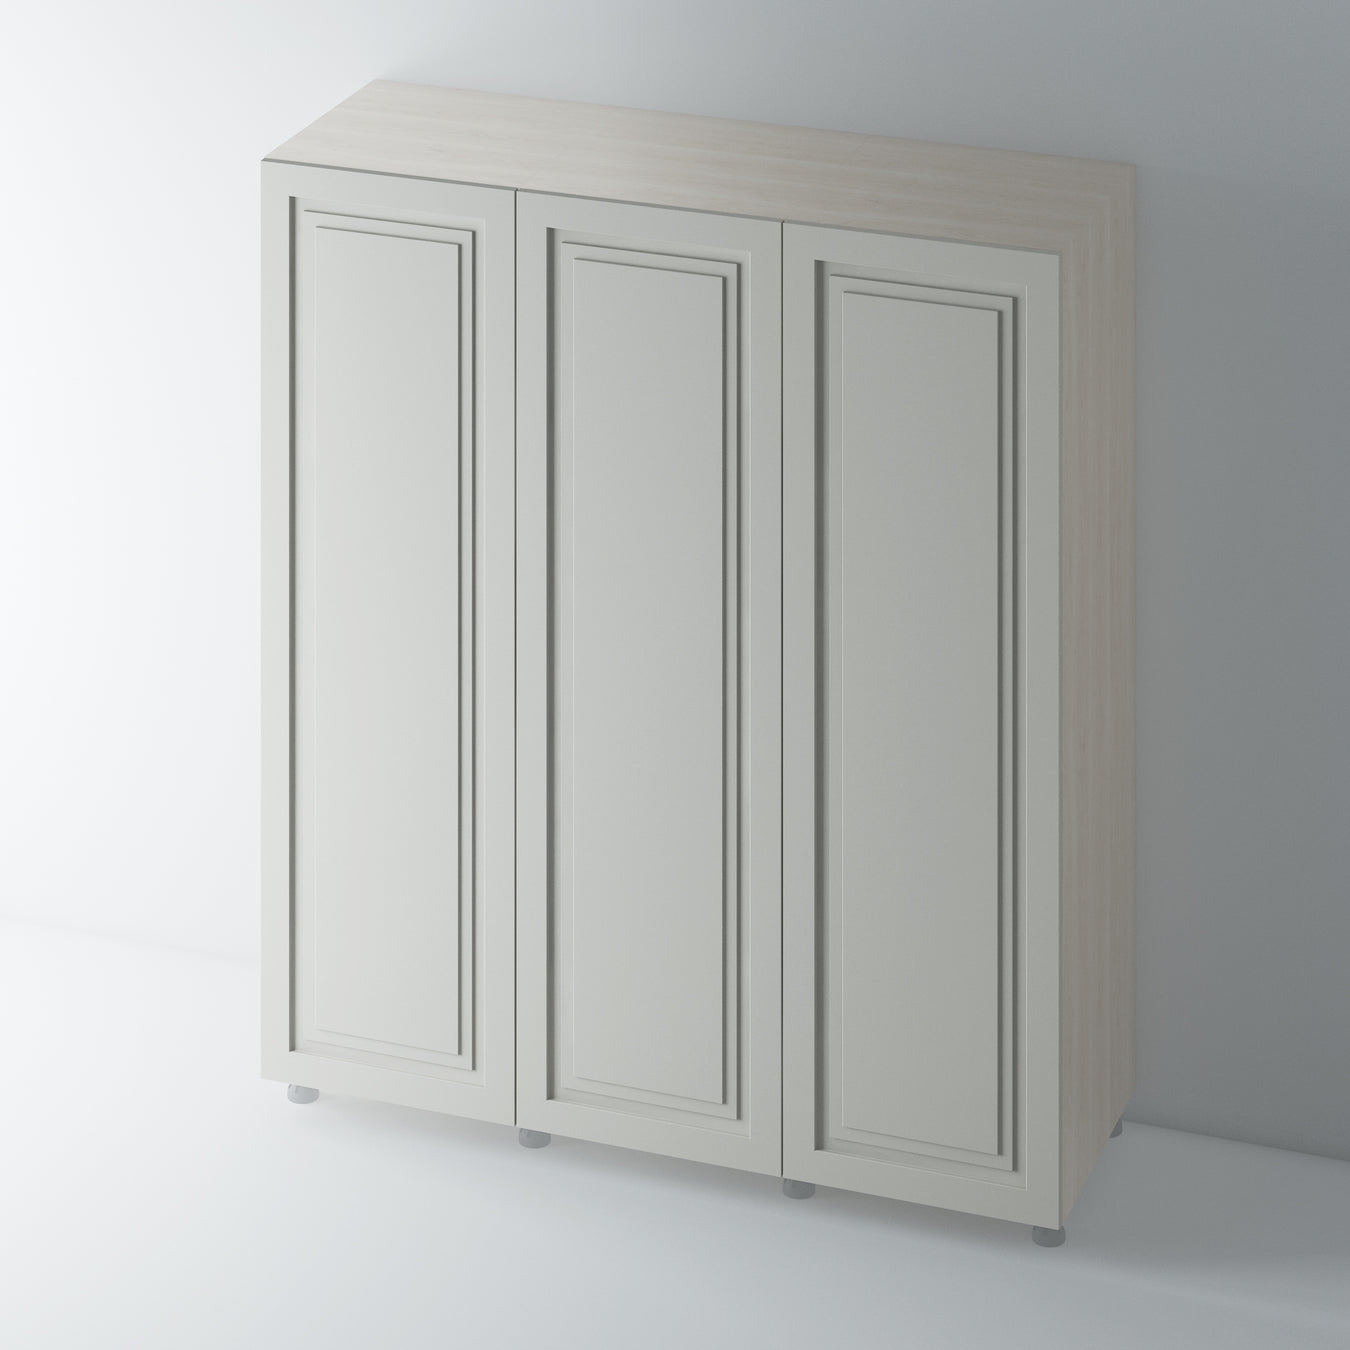 Painted Stepped Panel Wardrobe Doors